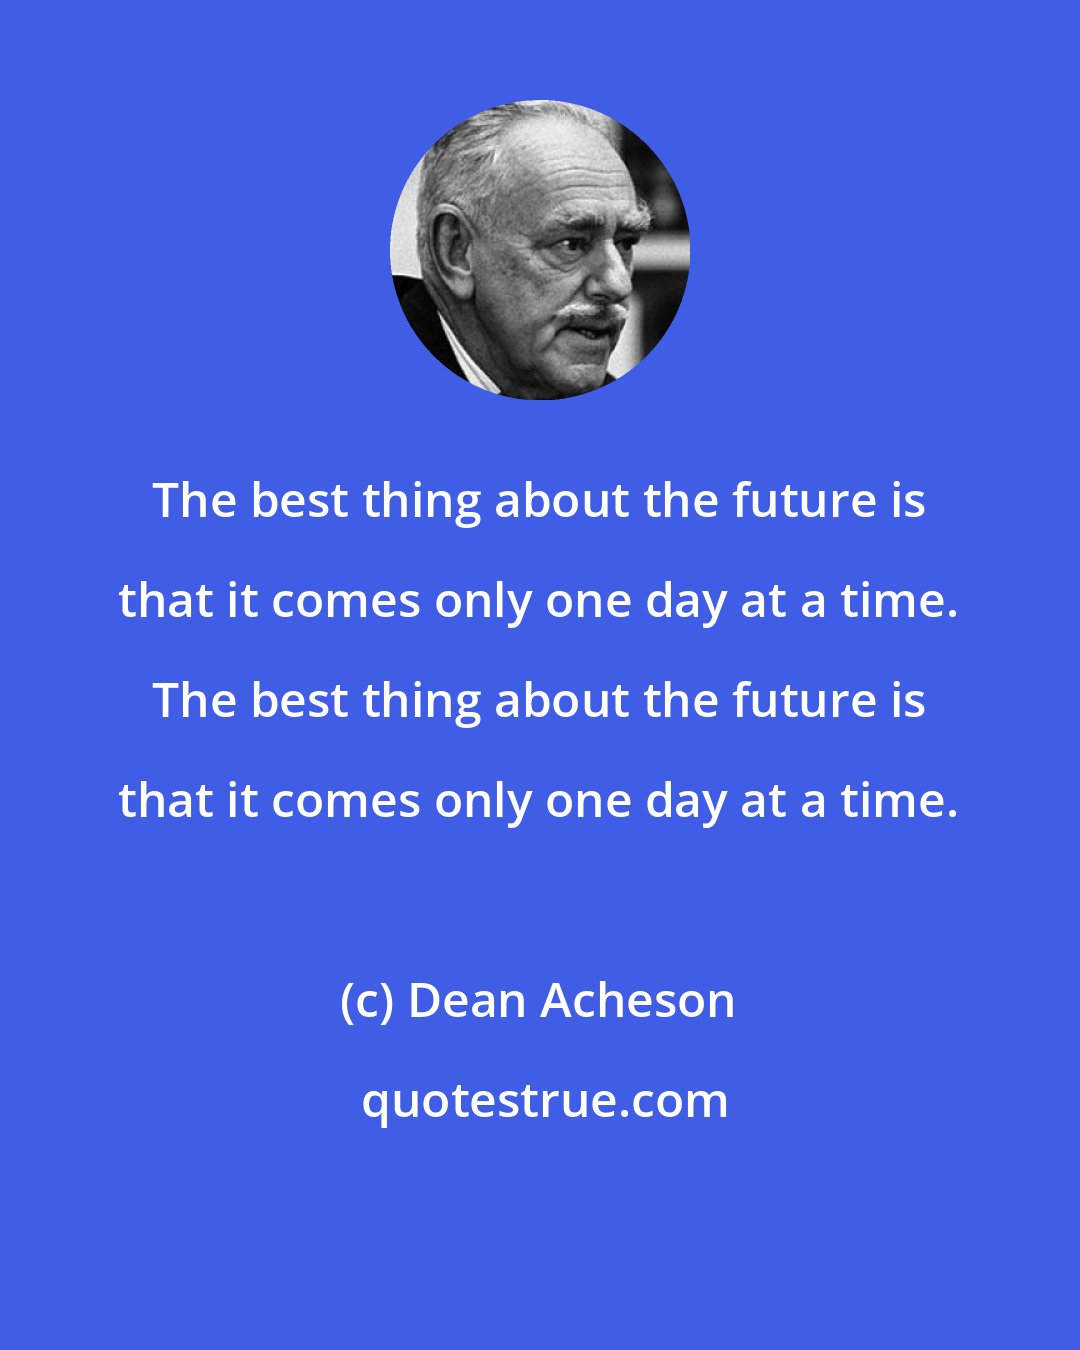 Dean Acheson: The best thing about the future is that it comes only one day at a time. The best thing about the future is that it comes only one day at a time.